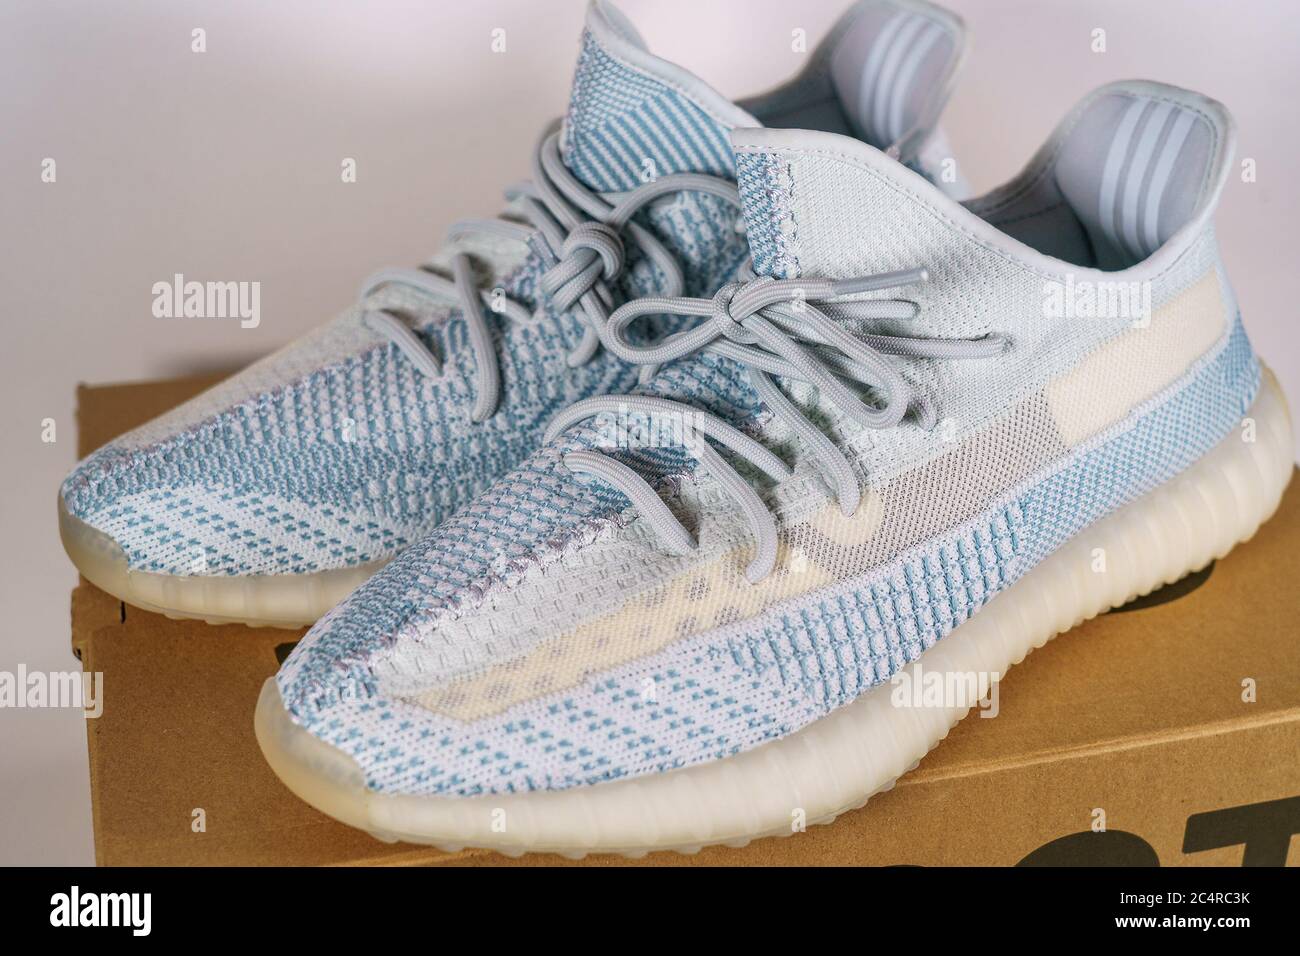 Moscow, Russia - June 2020 : Adidas Yeezy Boost 350 V2 Cloud White - Famous  Limited Collection Fashion Sneakers by Kanye West and Adidas Collaboration,  Trendy Sport Shoes Stock Photo - Alamy